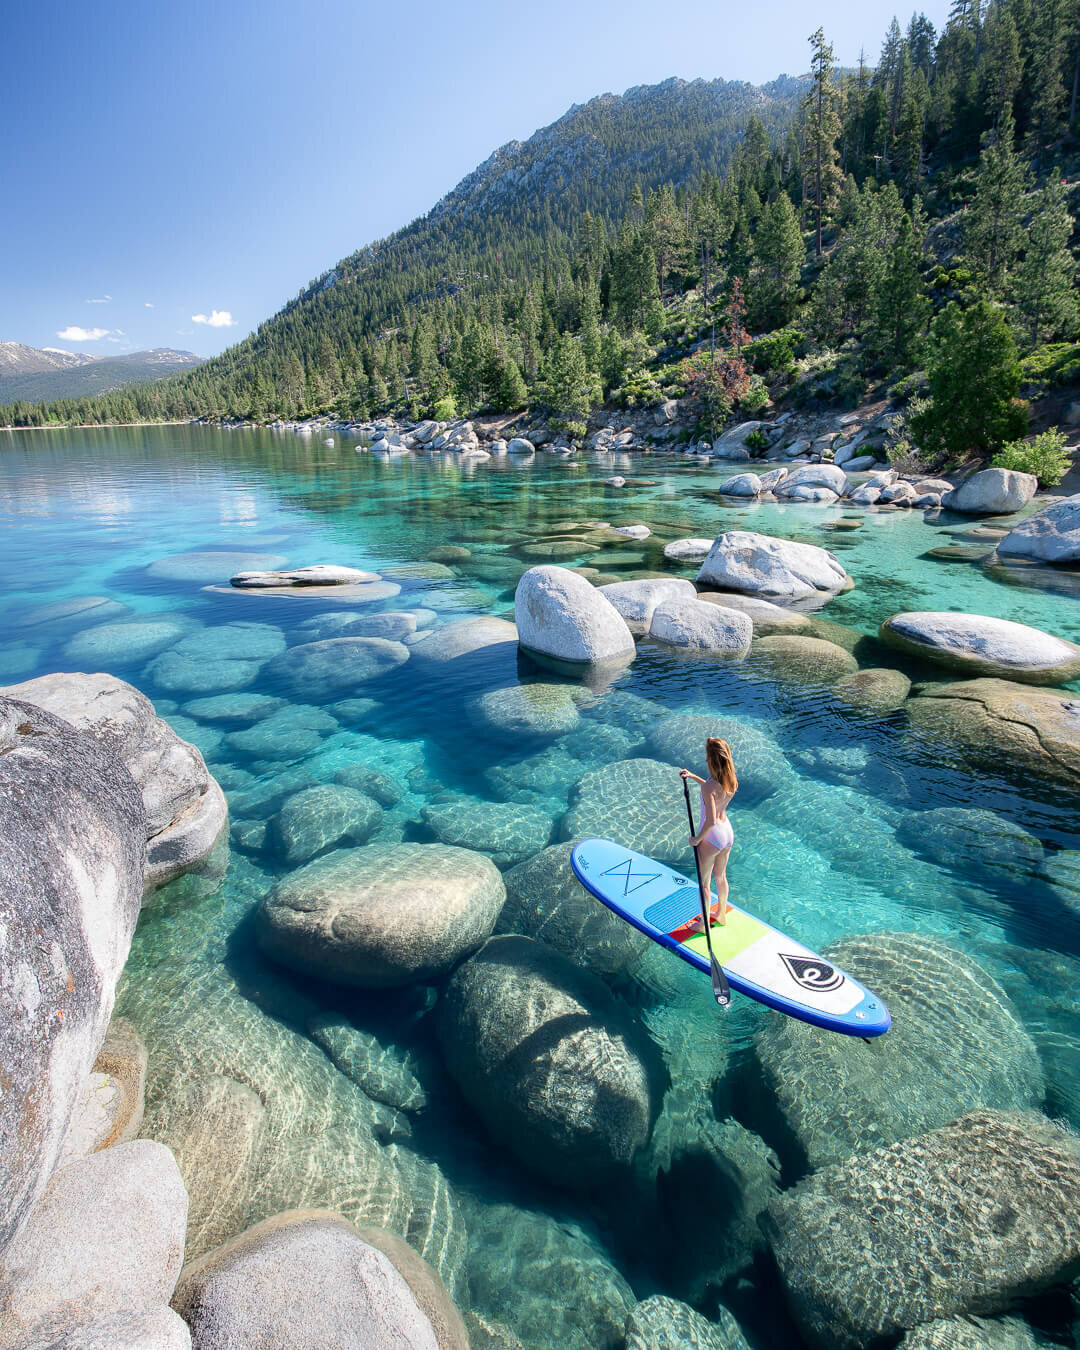 Paddeling on Lake Tahoe’s perfect water on a warm day in May.